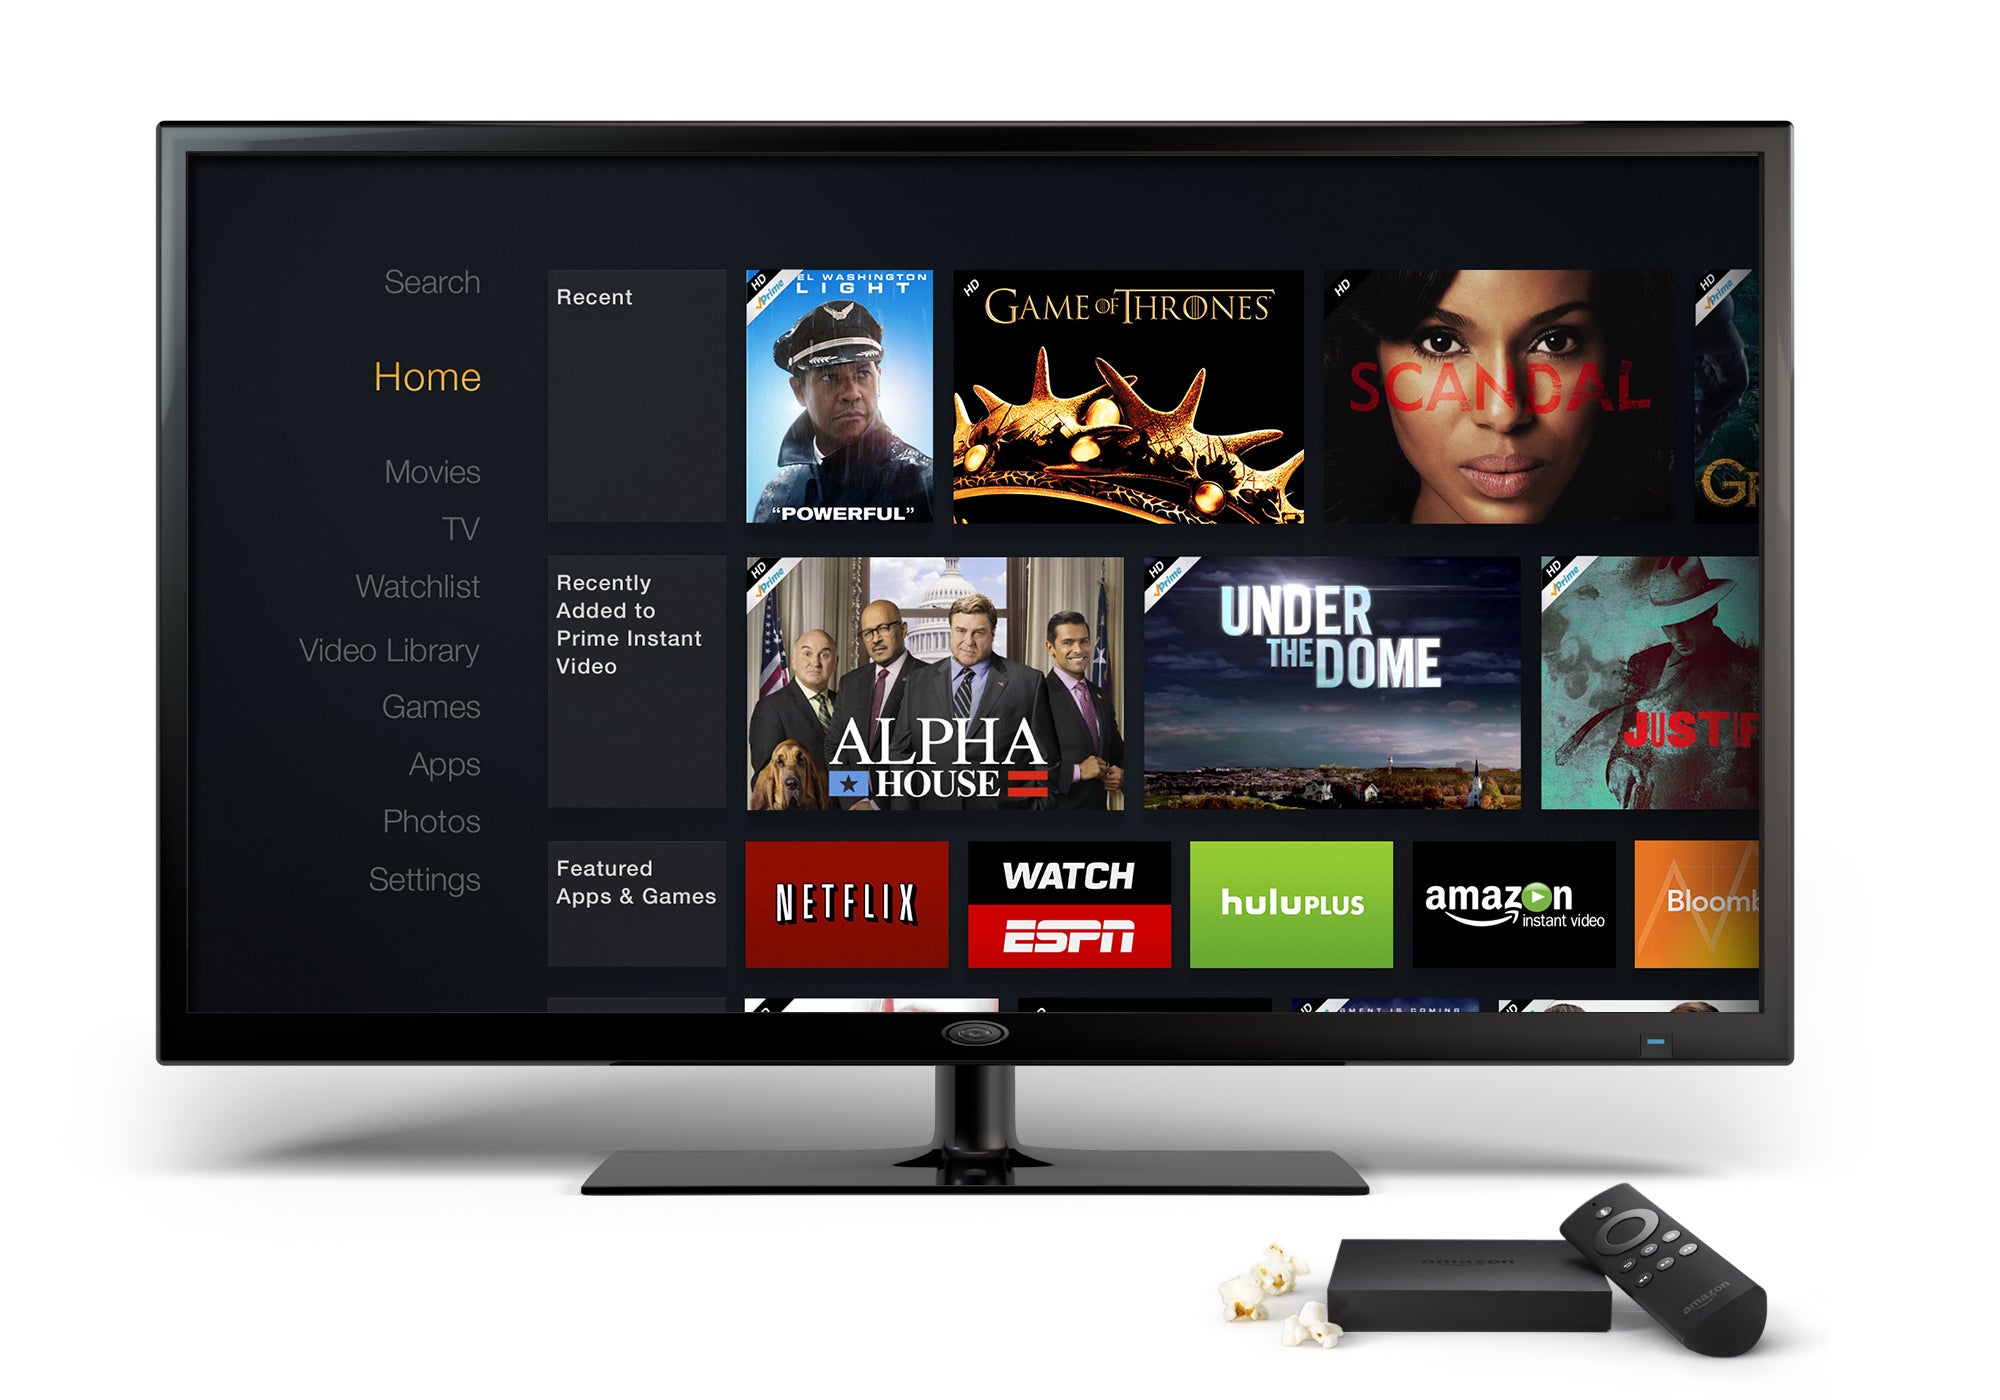 Amazon's FireTV $99 set-top box is looking to light up your living room